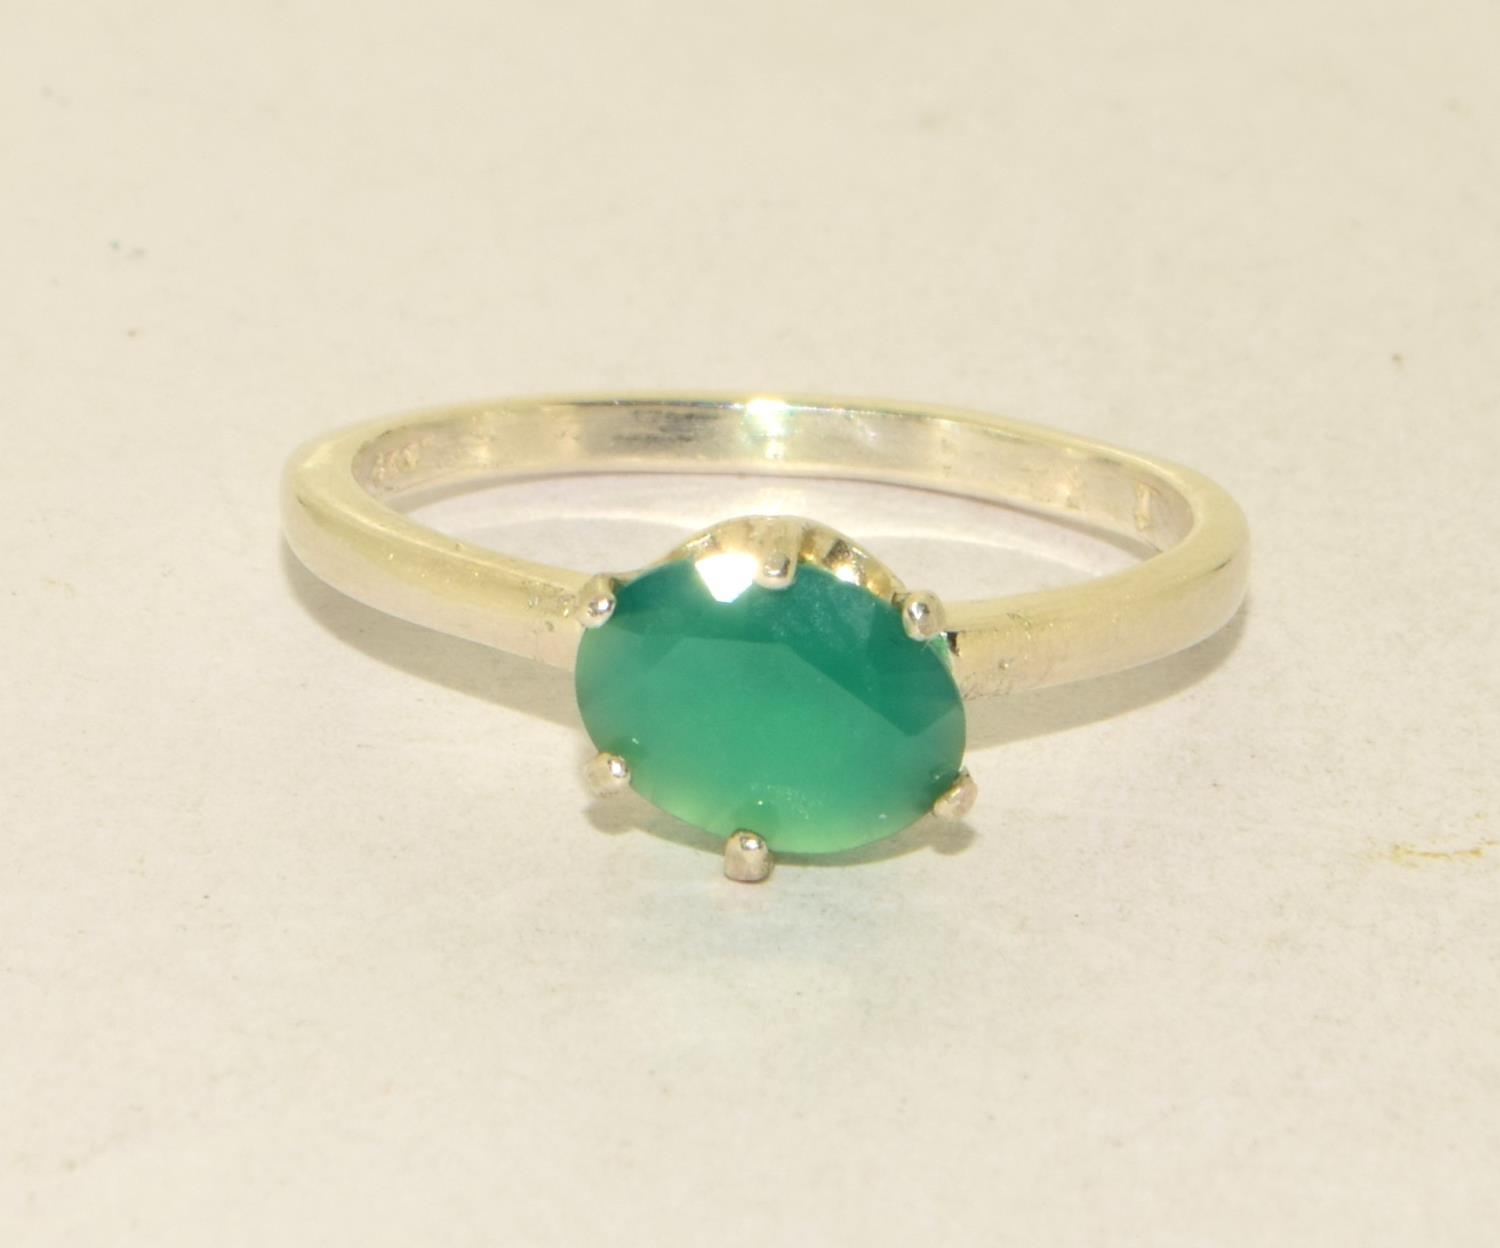 A 925 silver solitaire green stone ring Size P 1/2.